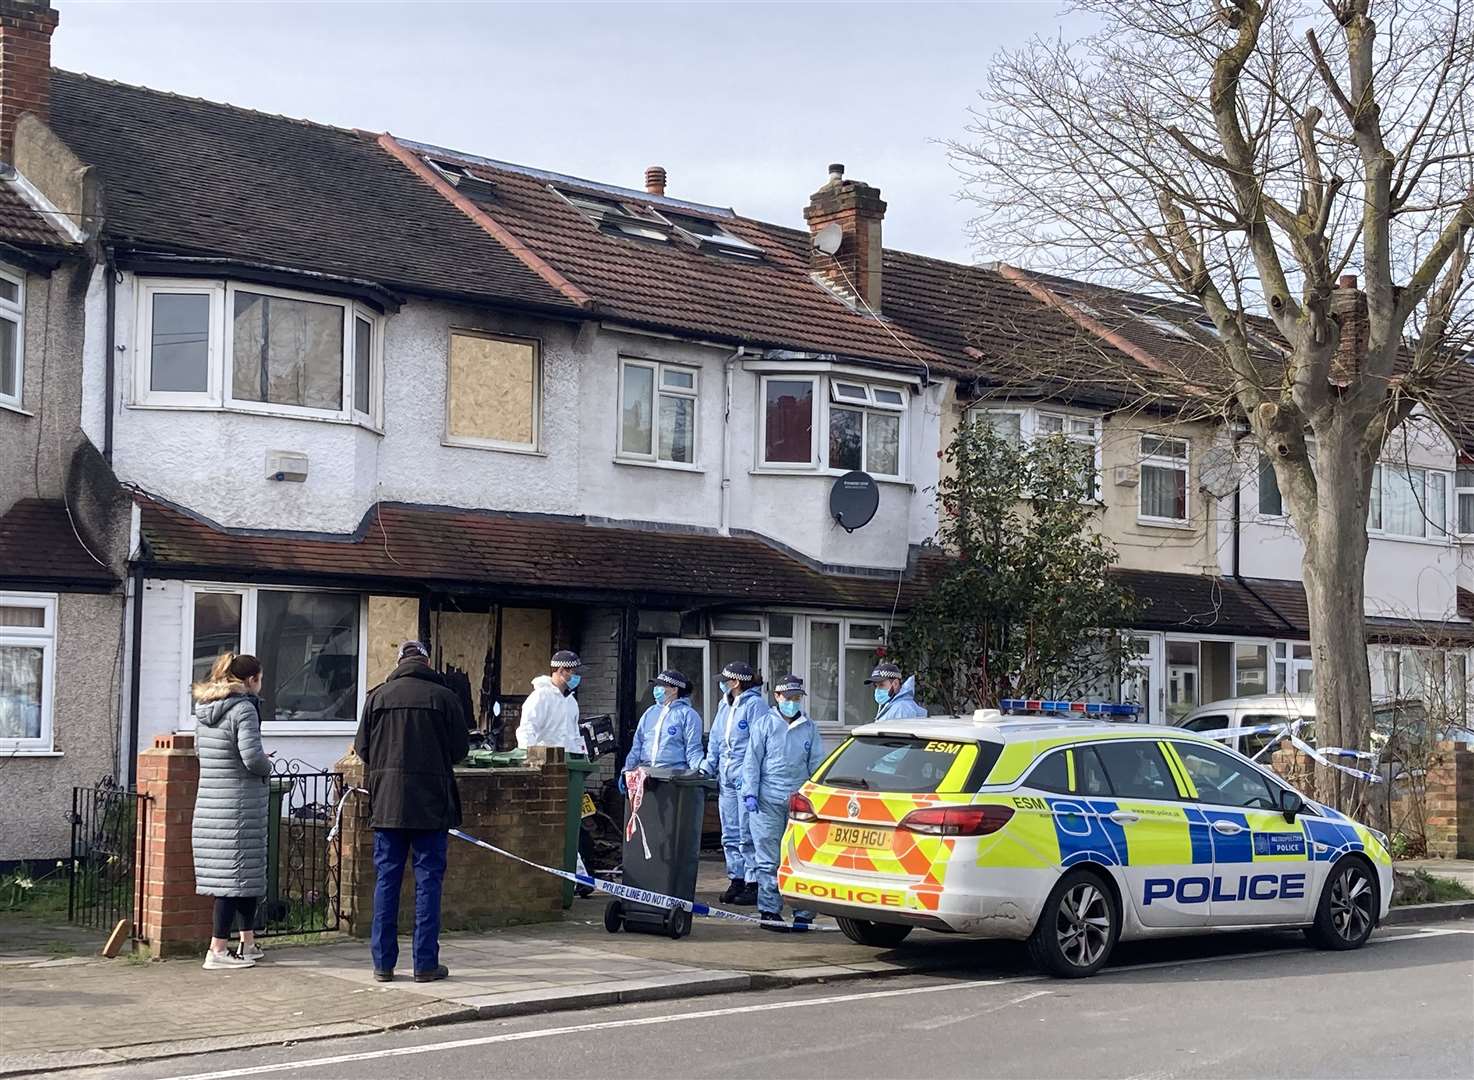 Forensic officers at the scene of the fatal fire in Streatham, south London (Tom Barnes/PA)